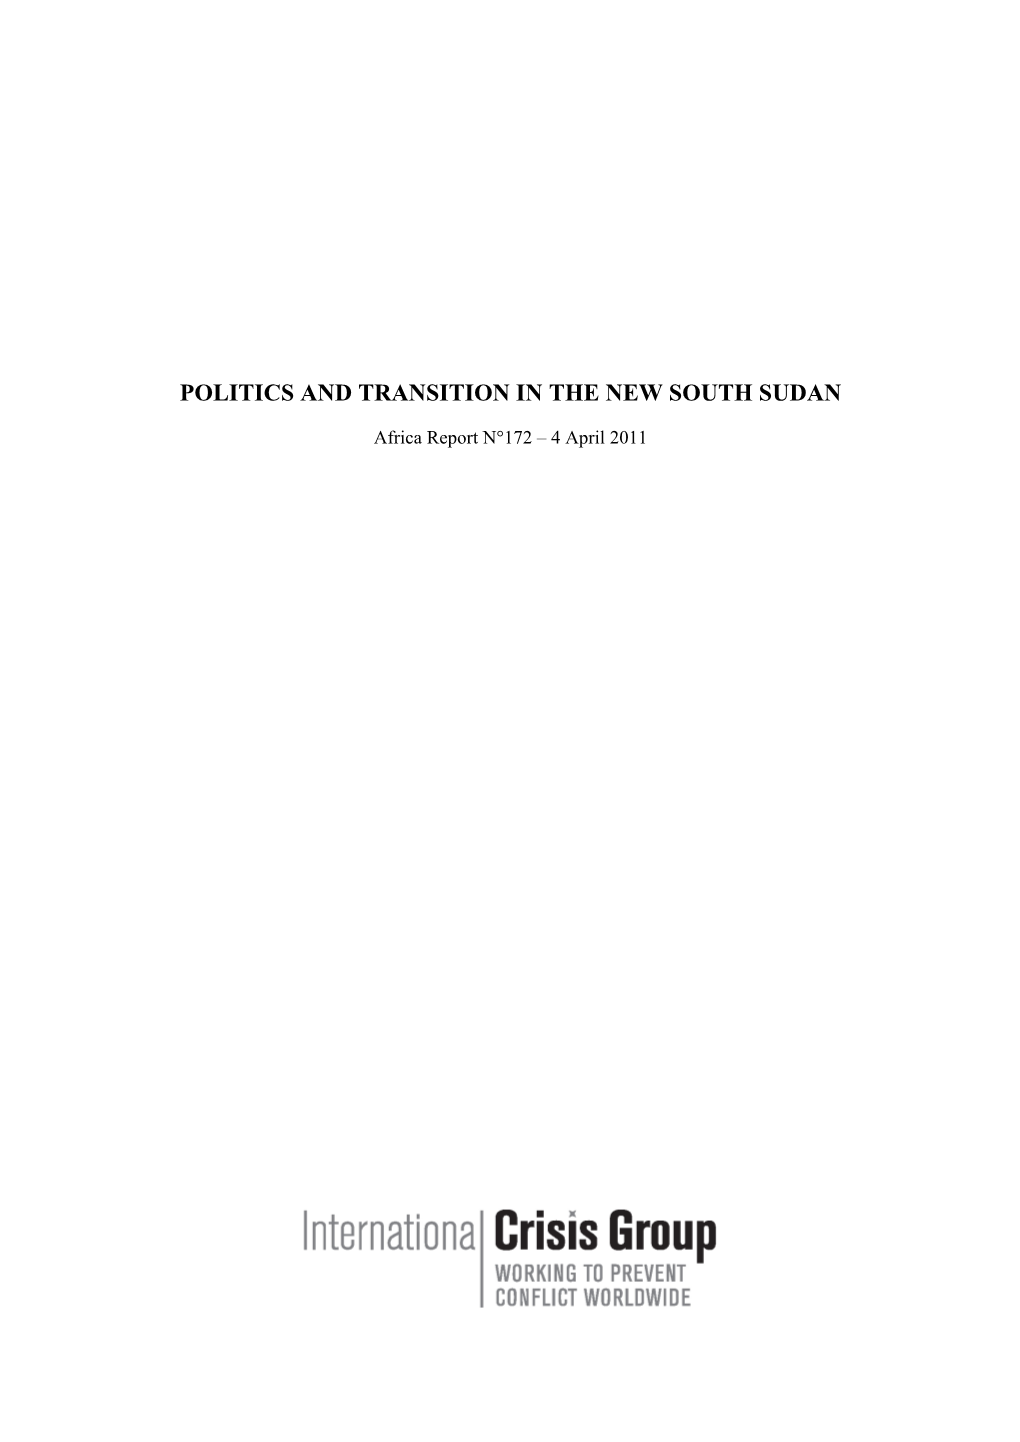 Politics and Transition in the New South Sudan